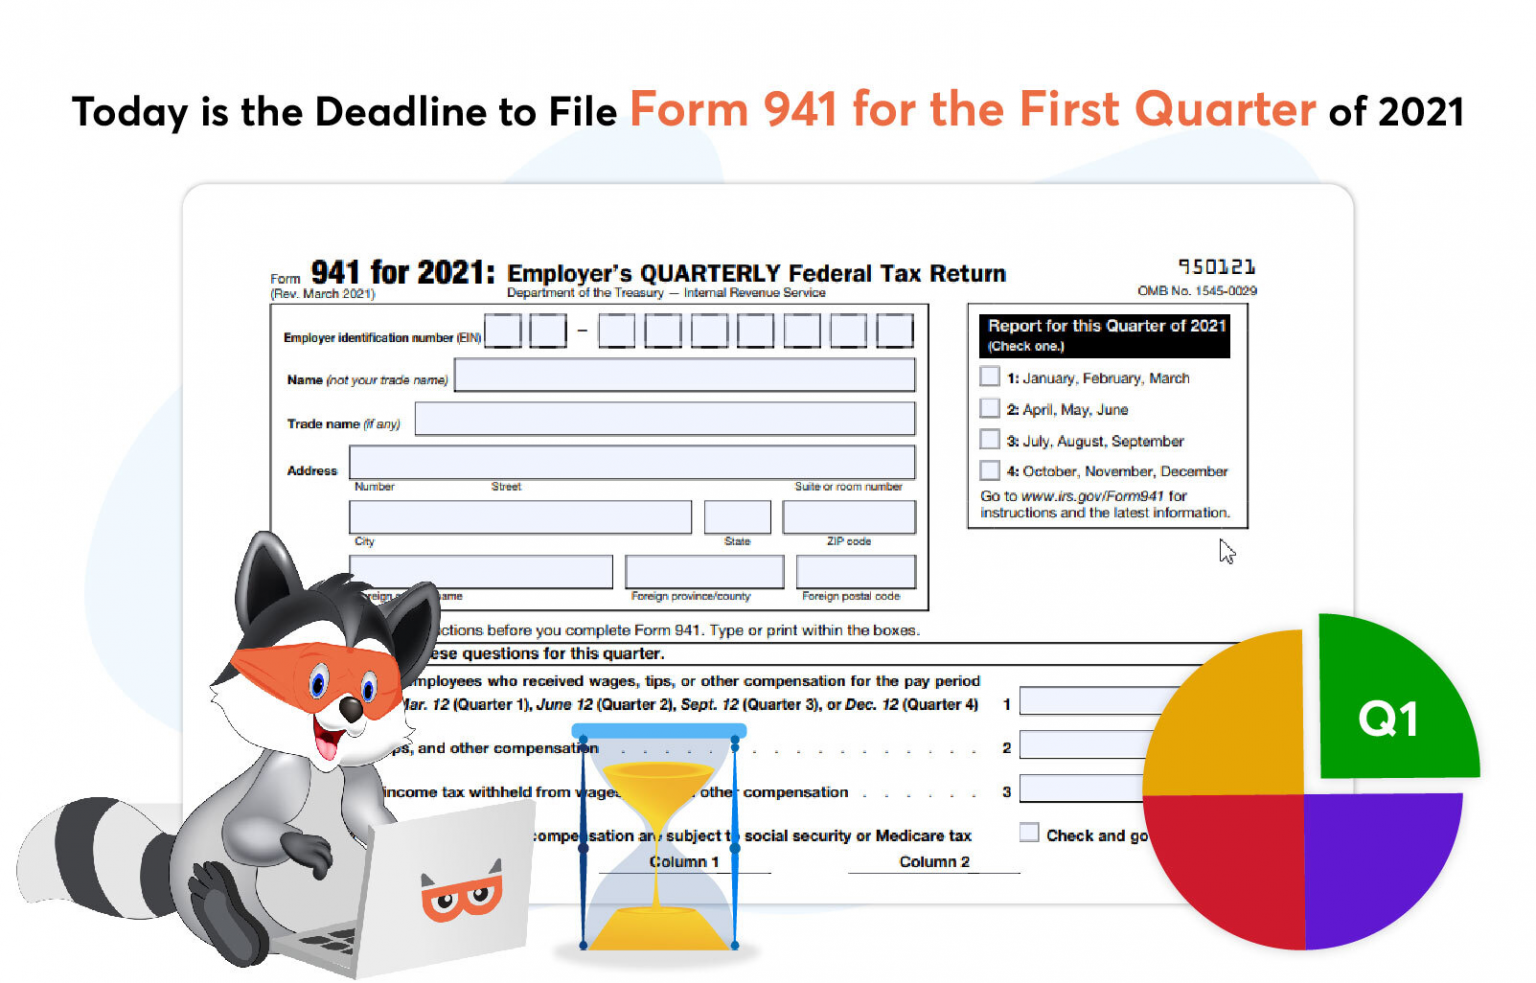 Today is the Deadline to File Form 941 for the First Quarter of 2021